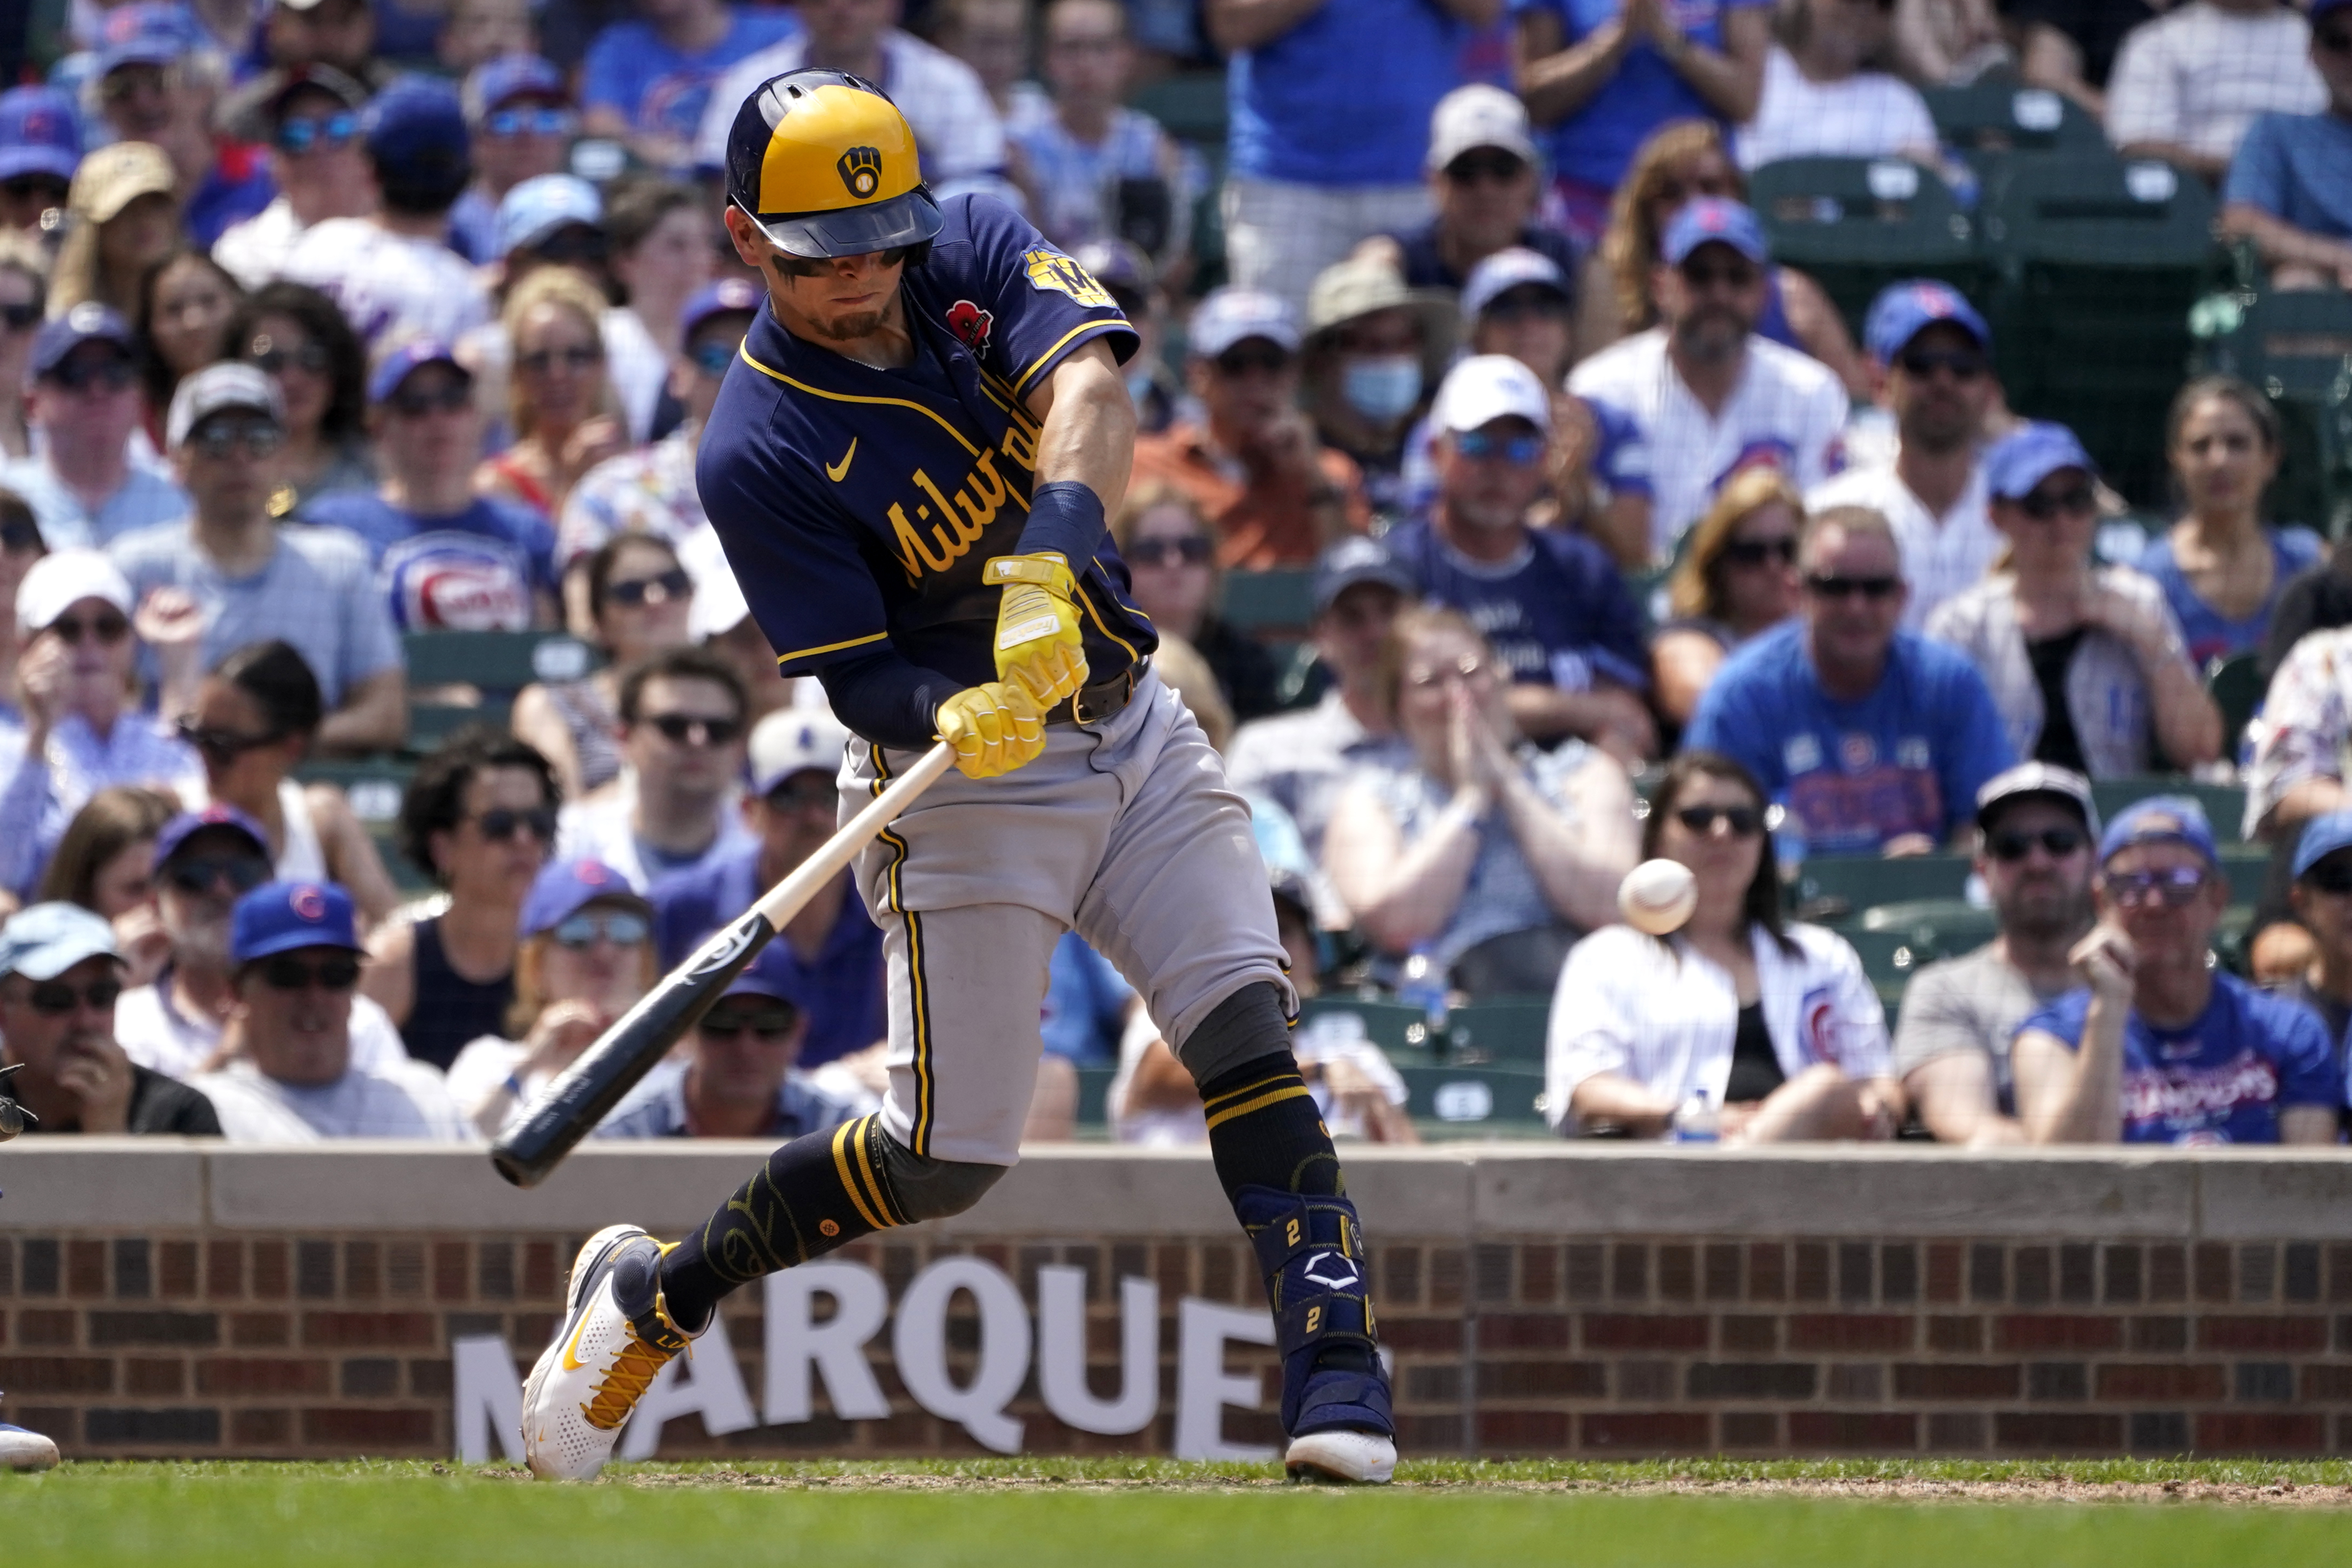 Rowdy Tellez lifts Brewers over Padres in series opener